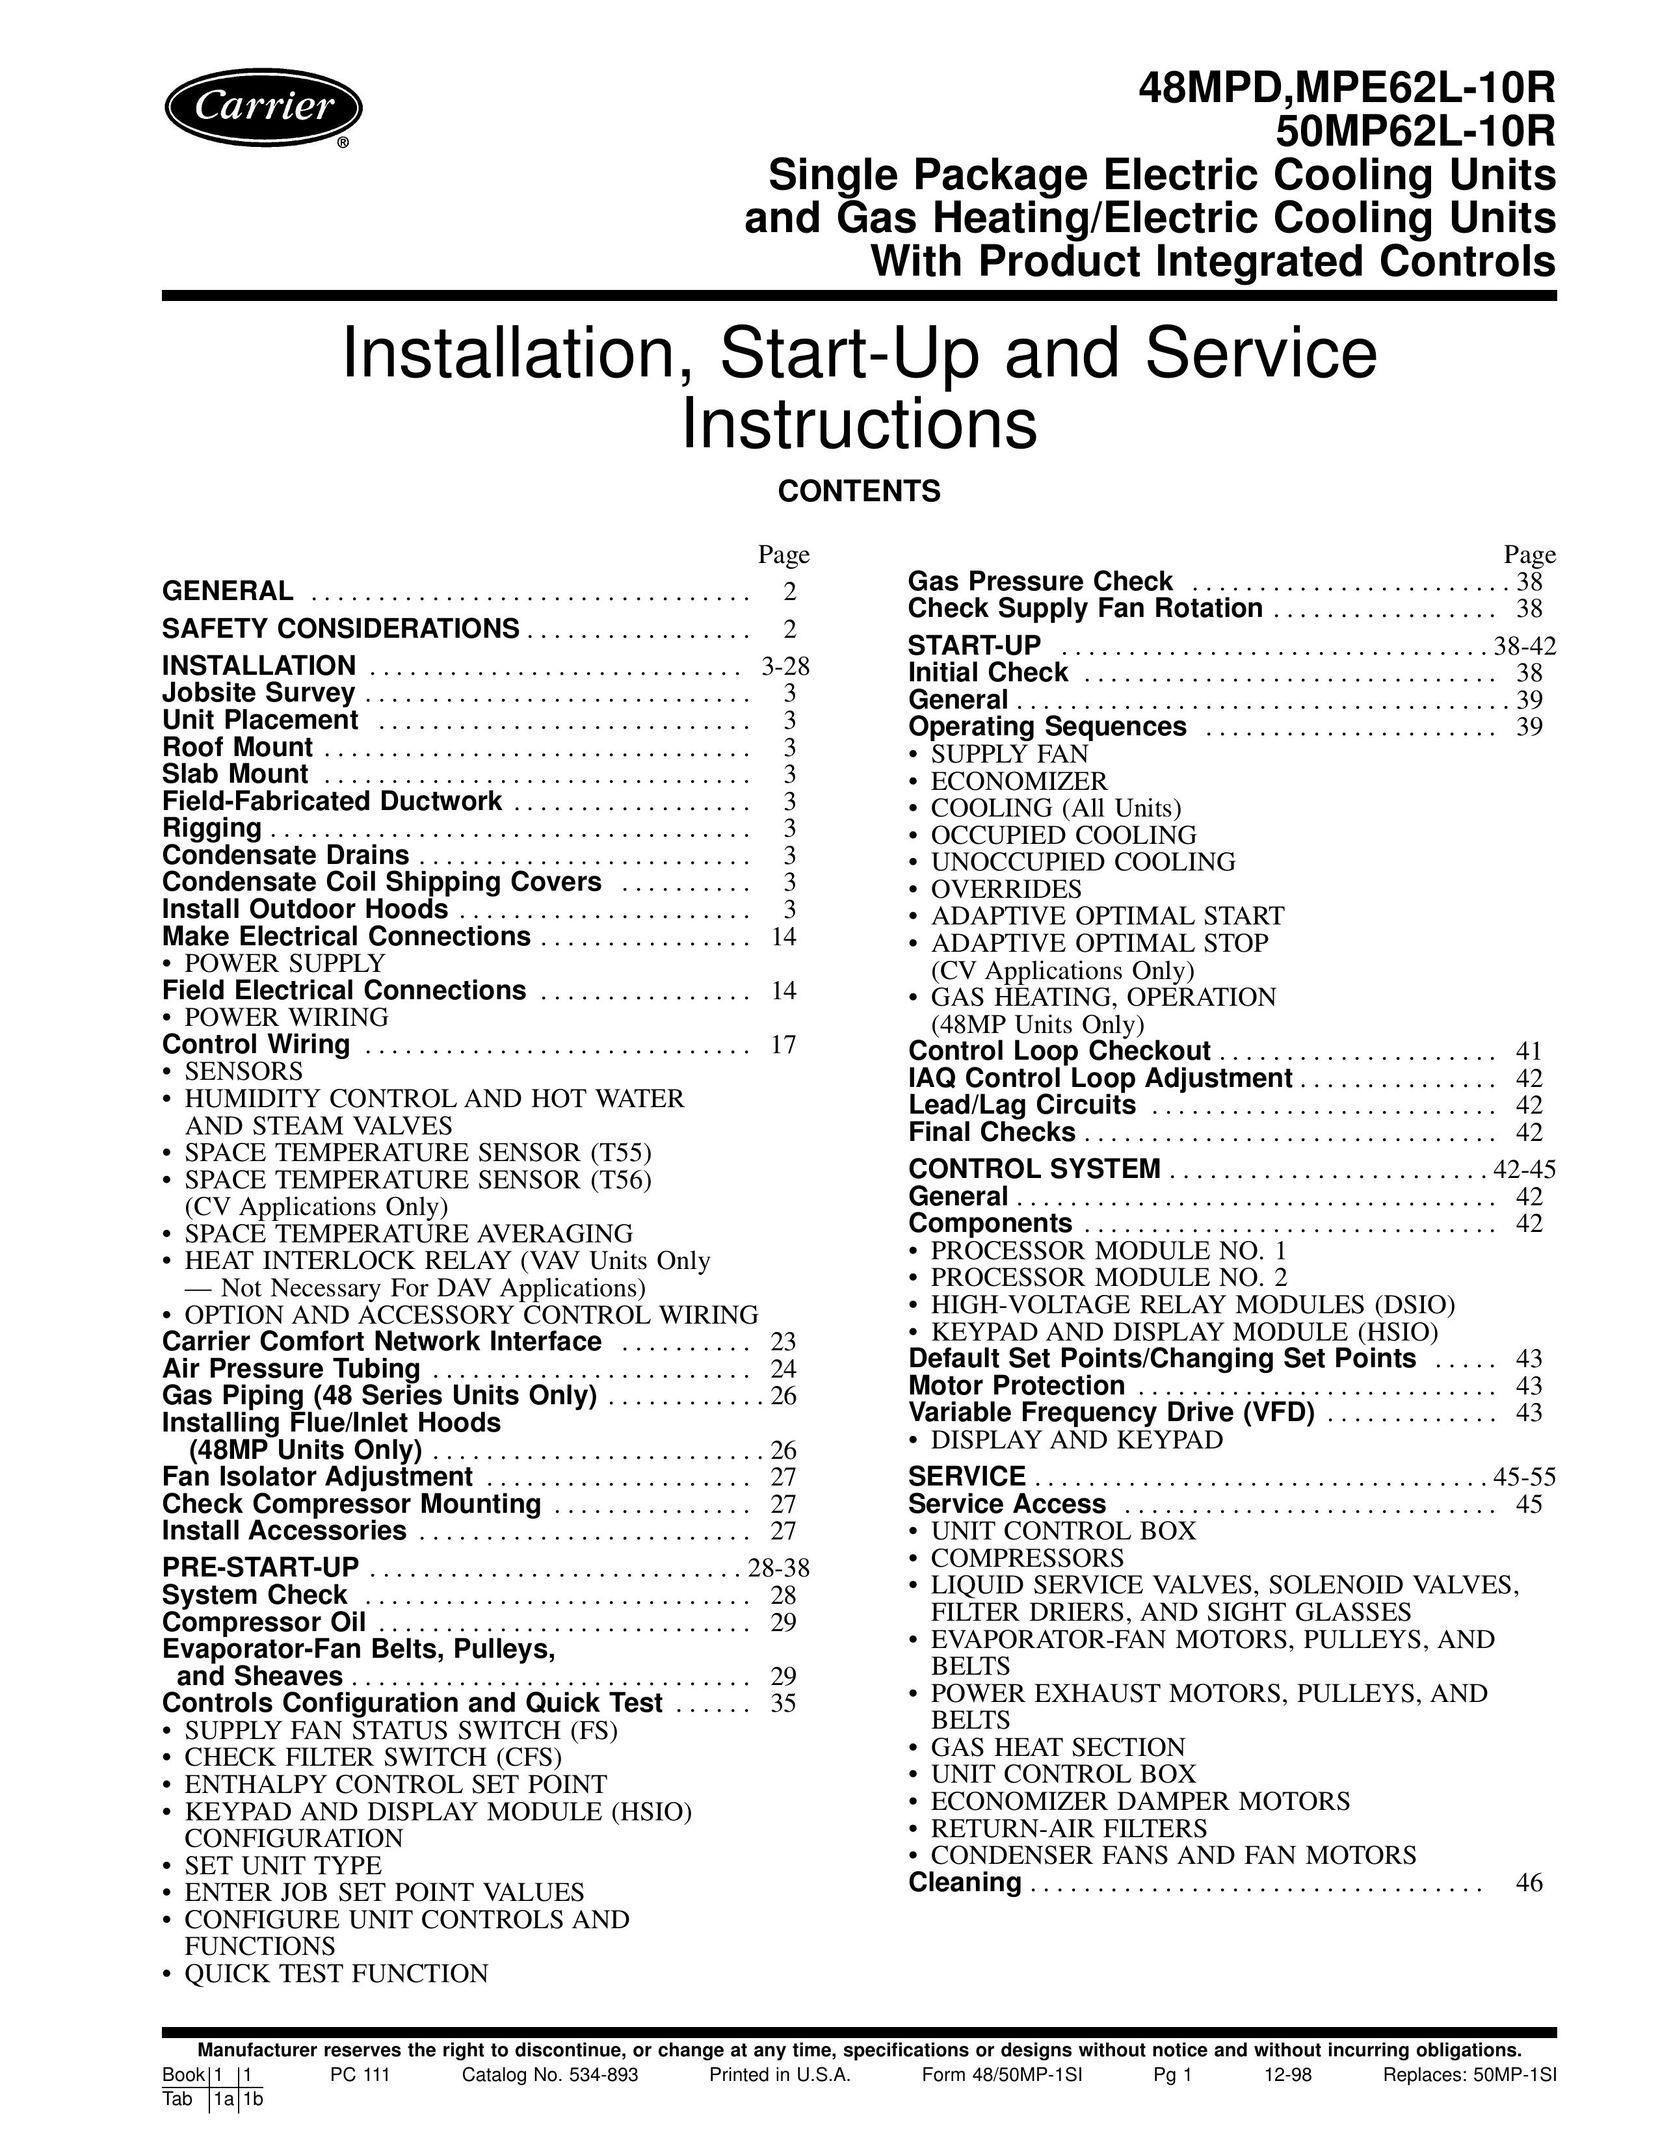 Carrier 48MPD Heating System User Manual